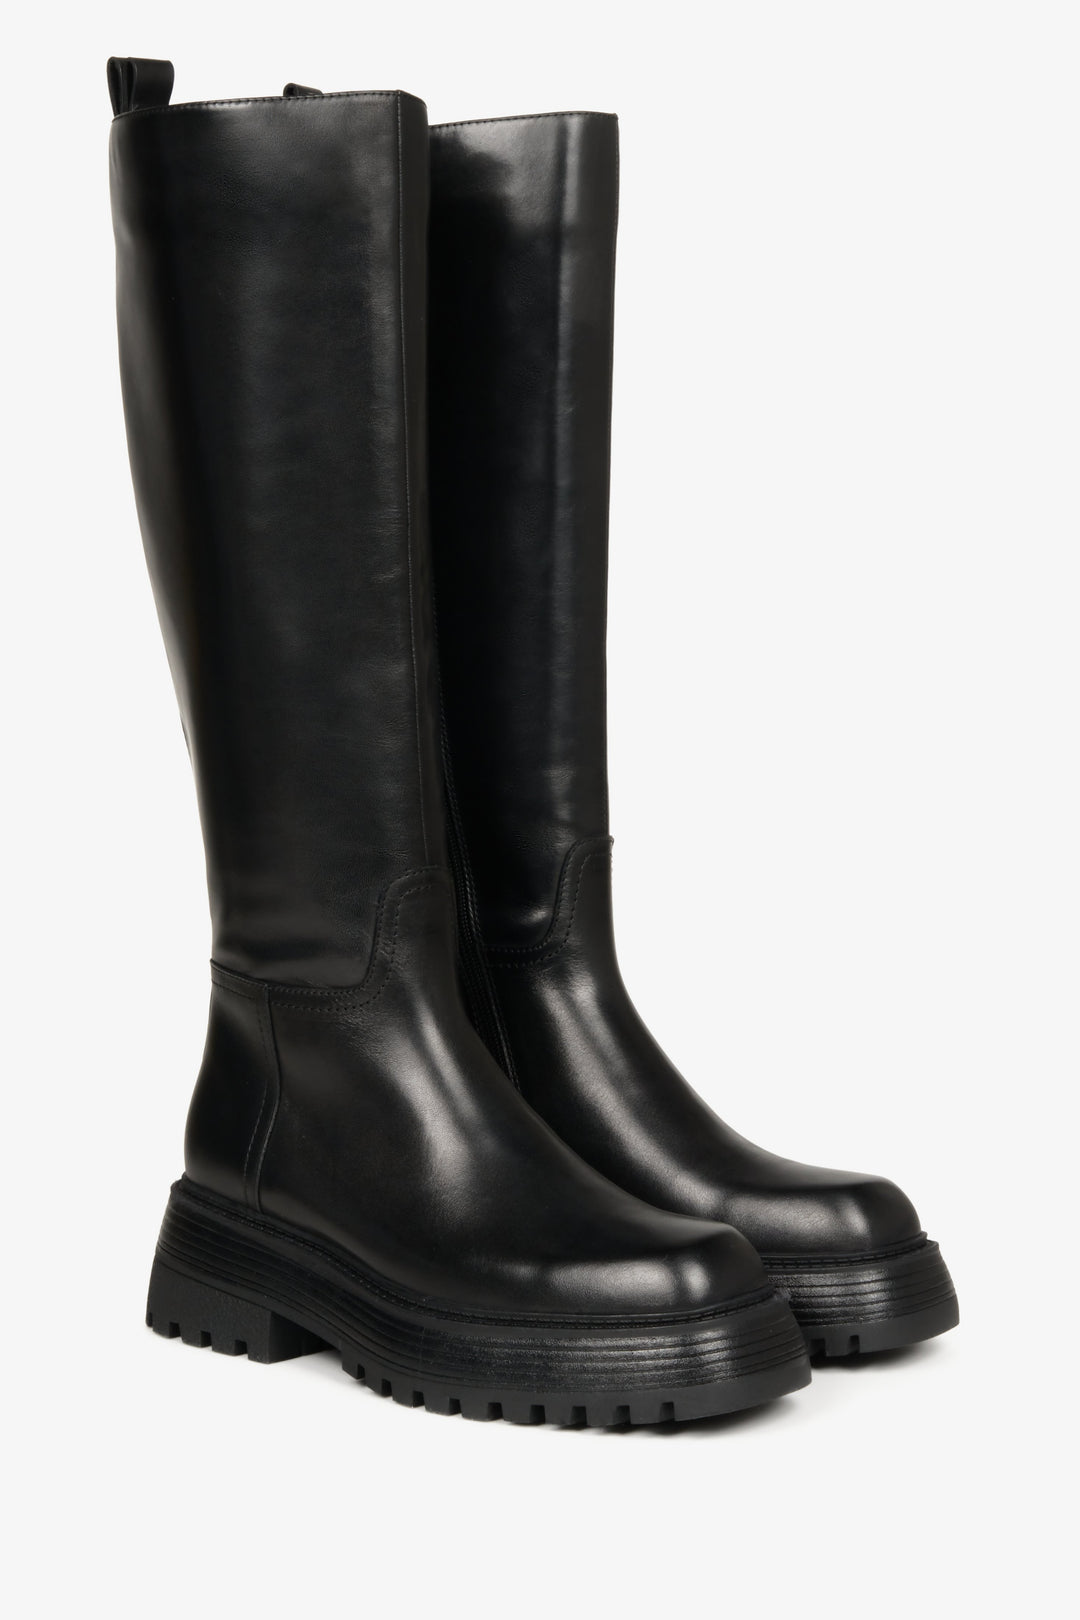 Women's black, elevated fall/spring boots made of genuine leather with a wide shaft - close-up of the profile of Estro brand shoes.